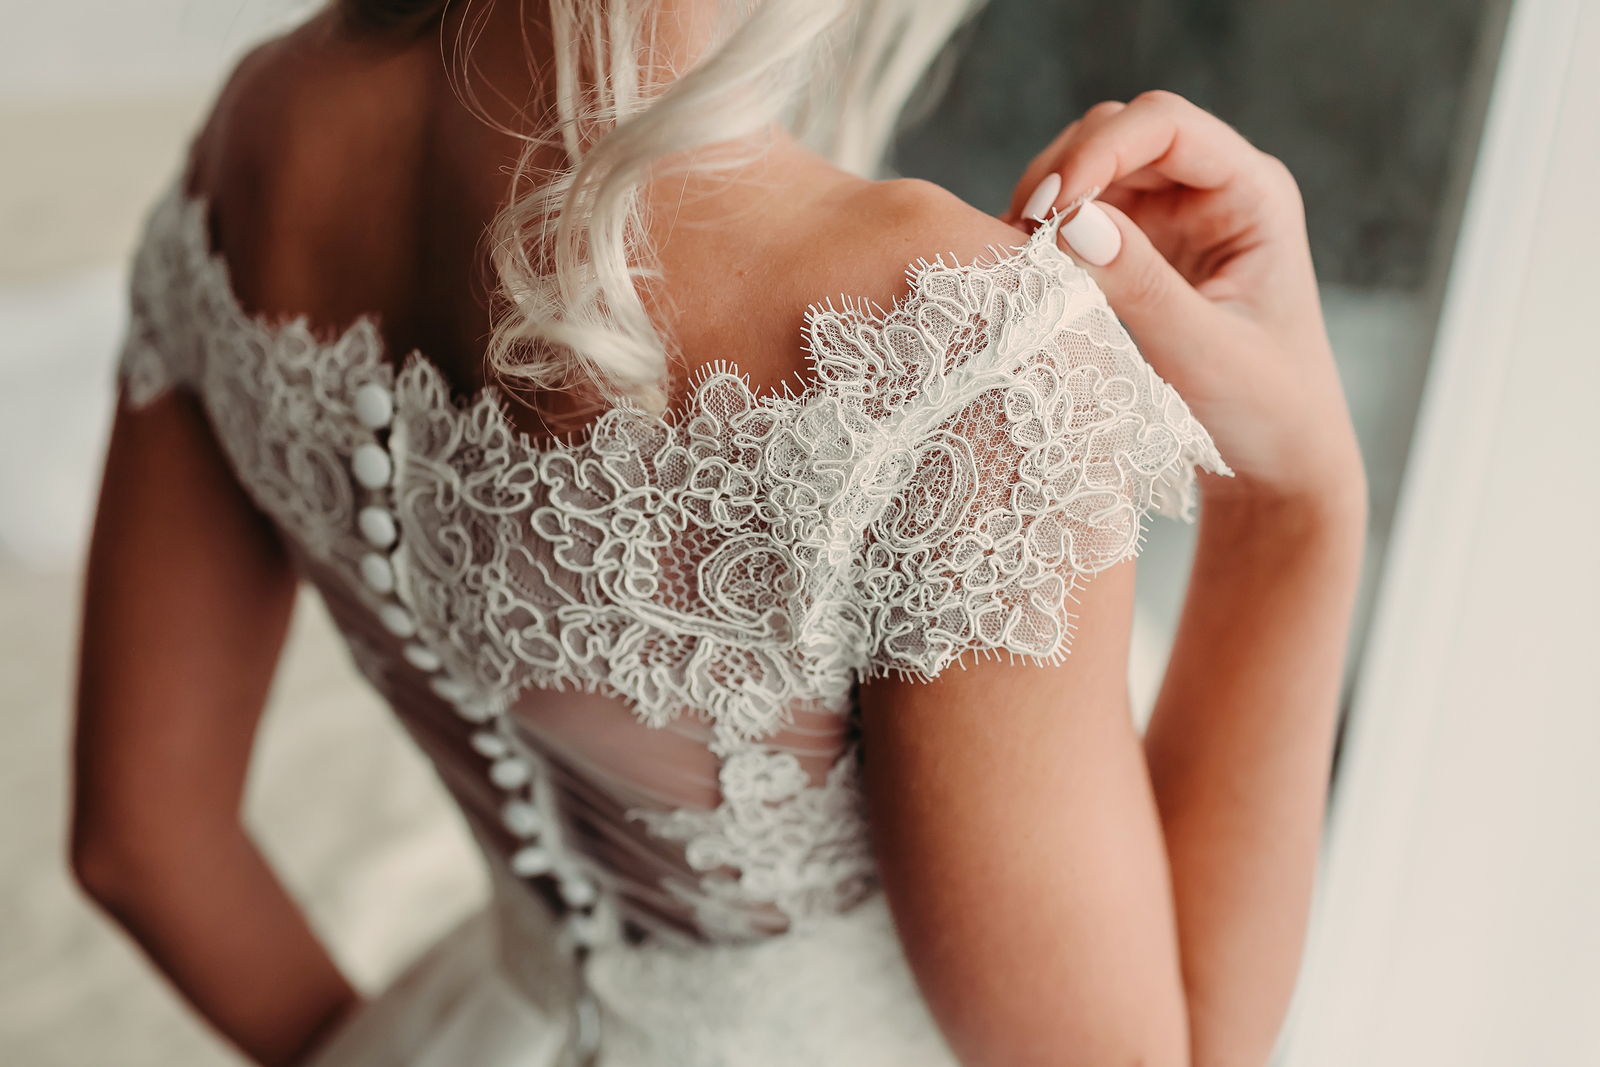 wedding gown lace design